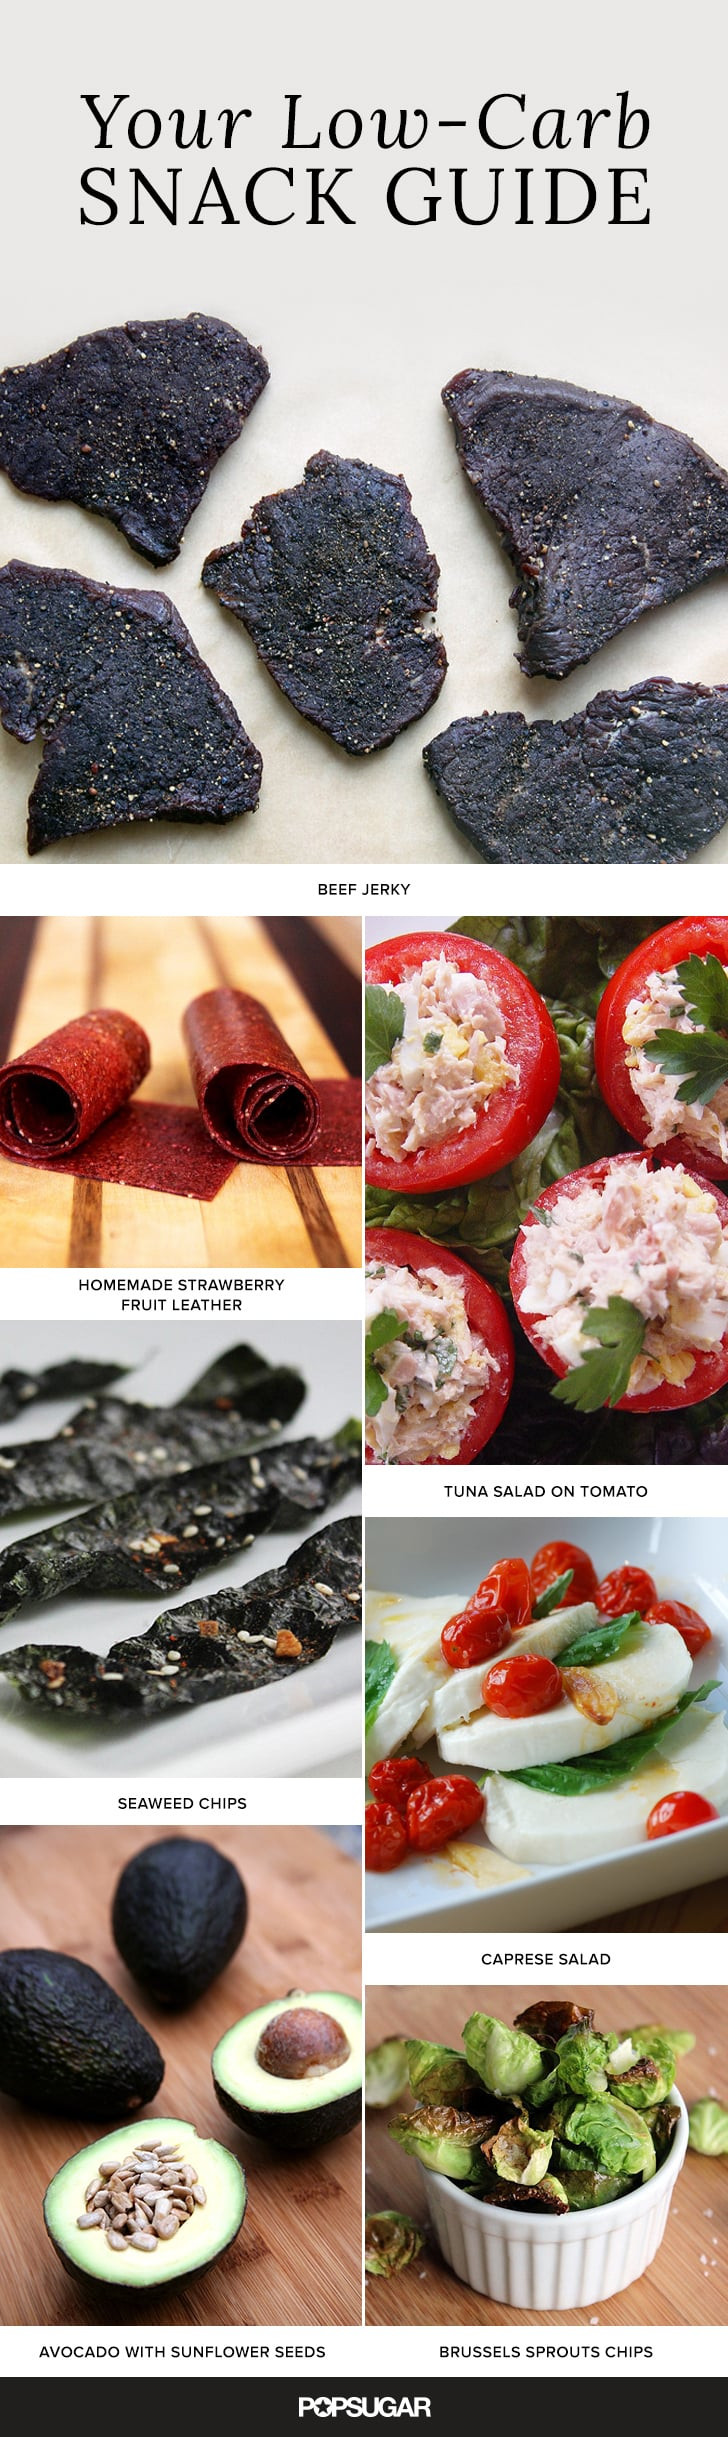 Healthy Snacks Low Carb
 Healthy Low Carb Snack Ideas